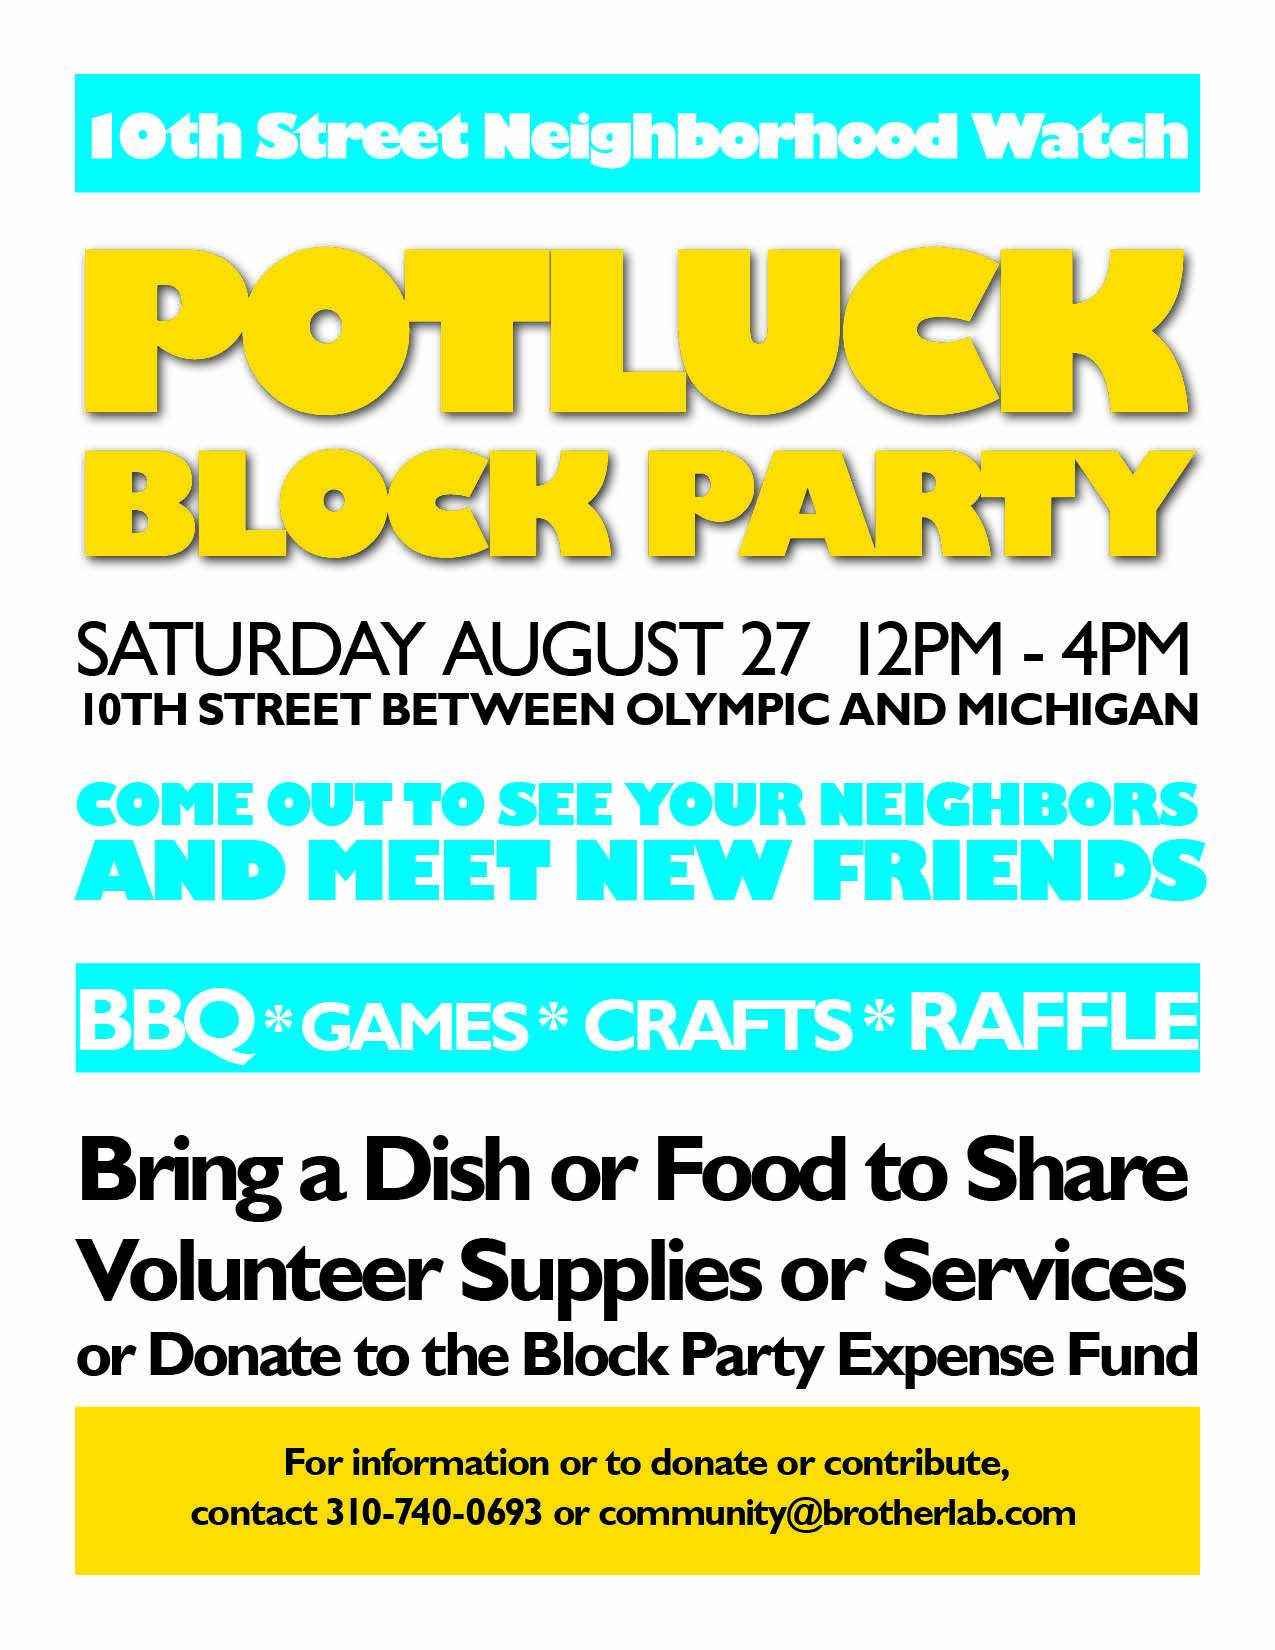 Block Party Invite Wording Google Search Block Party In 2019 pertaining to dimensions 1275 X 1650